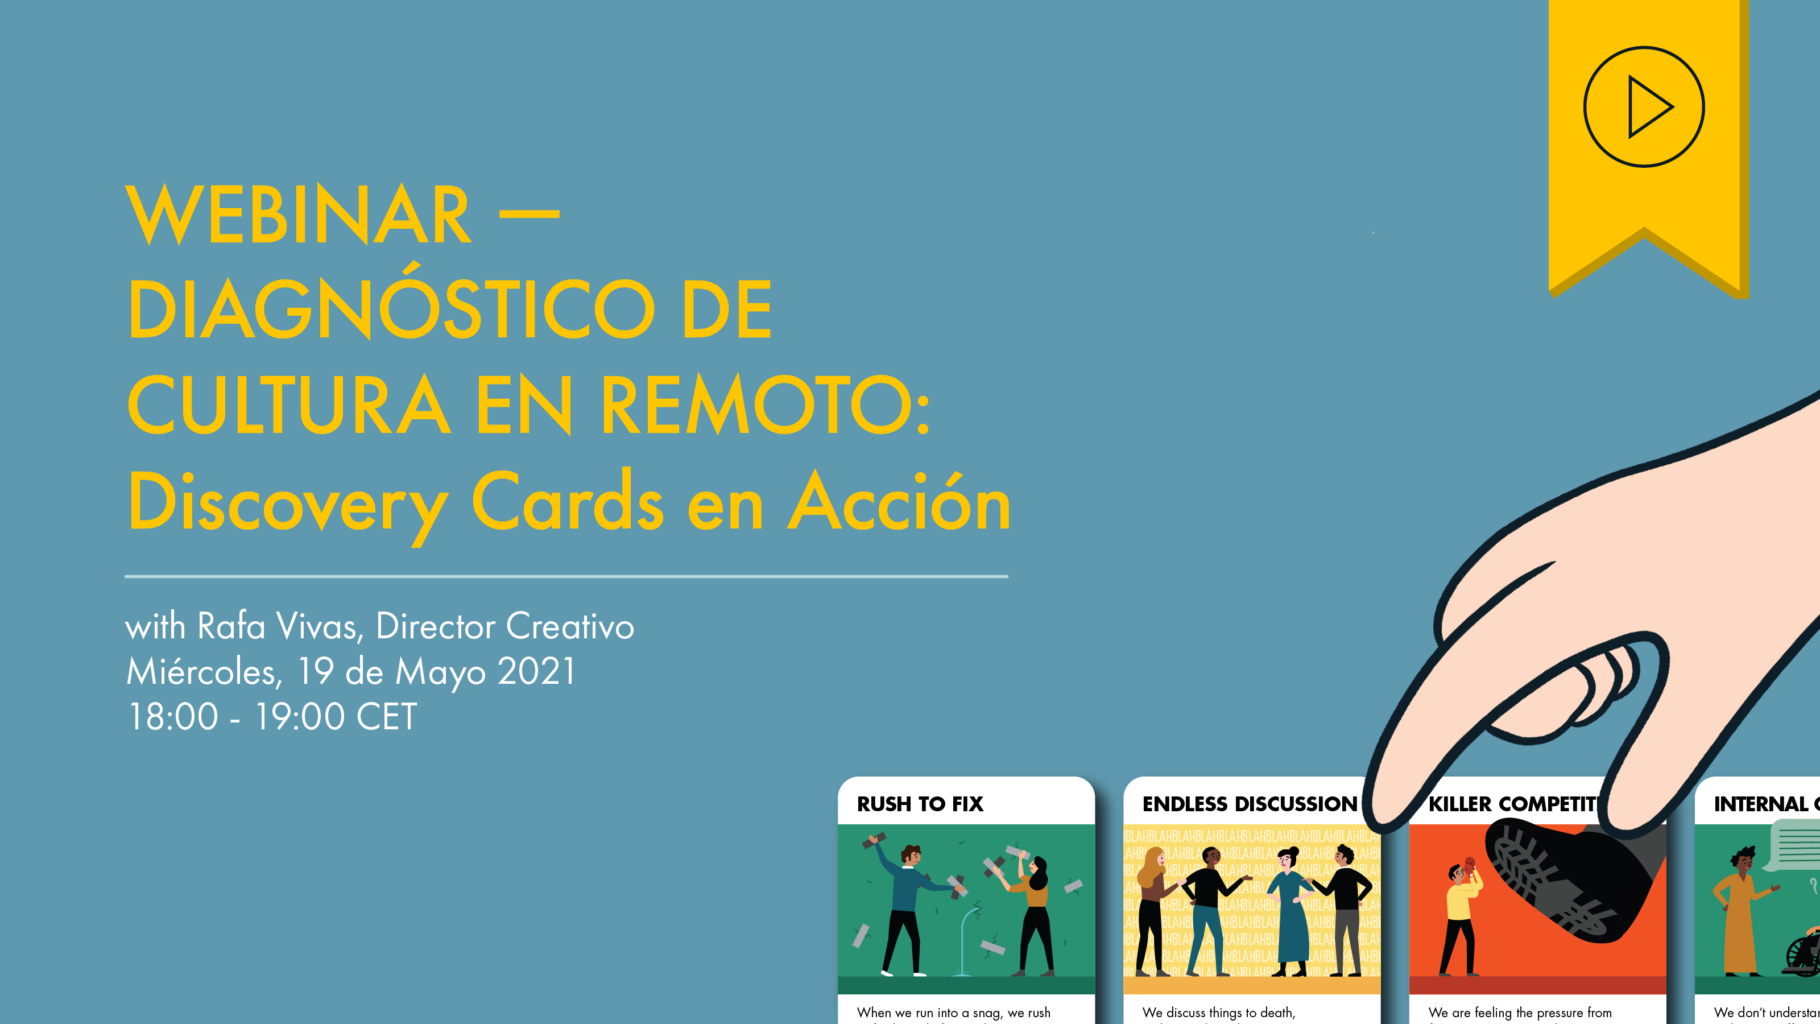 Header image of a hand entering from the right, hovering over four of XPLANE’s Discovery Cards. Text to the left reads “Diagnóstico de Cultura en Remoto: Discovery Cards en Acción. Miércoles, 19 de Mayo 2021, 18:00 - 19:00 CET”. Above is a yellow tag with a black play button icon denoting that this webinar has a recording available.